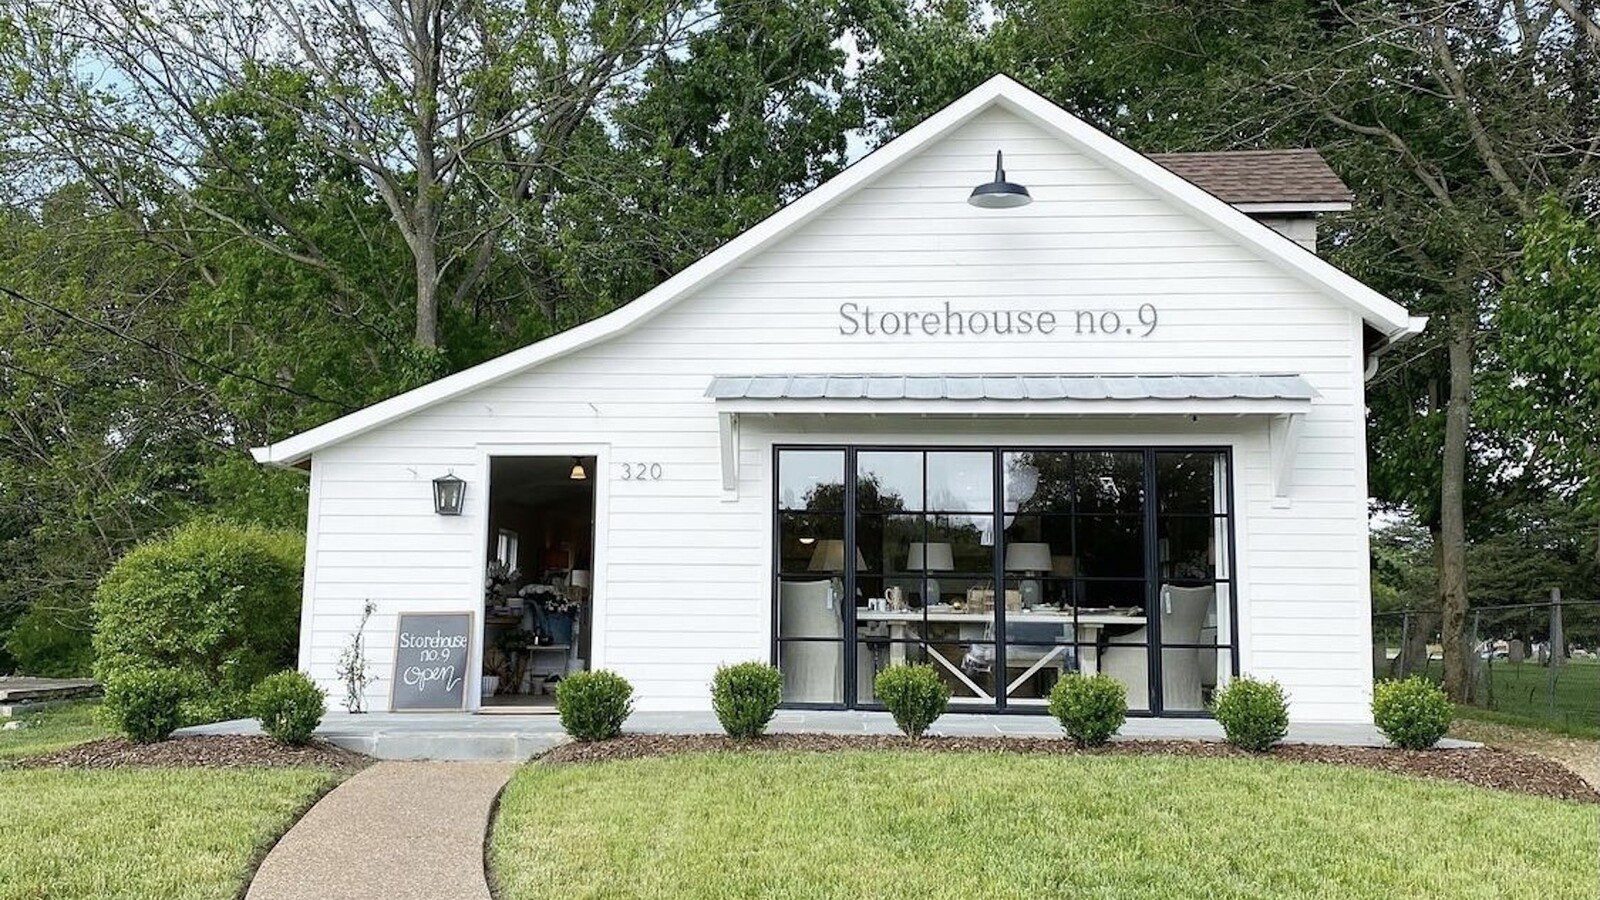 Storehouse no. 9, shopping in Downtown Franklin for fine furnishings, art, lighting, gifts and luxury outdoor and leisure furniture.